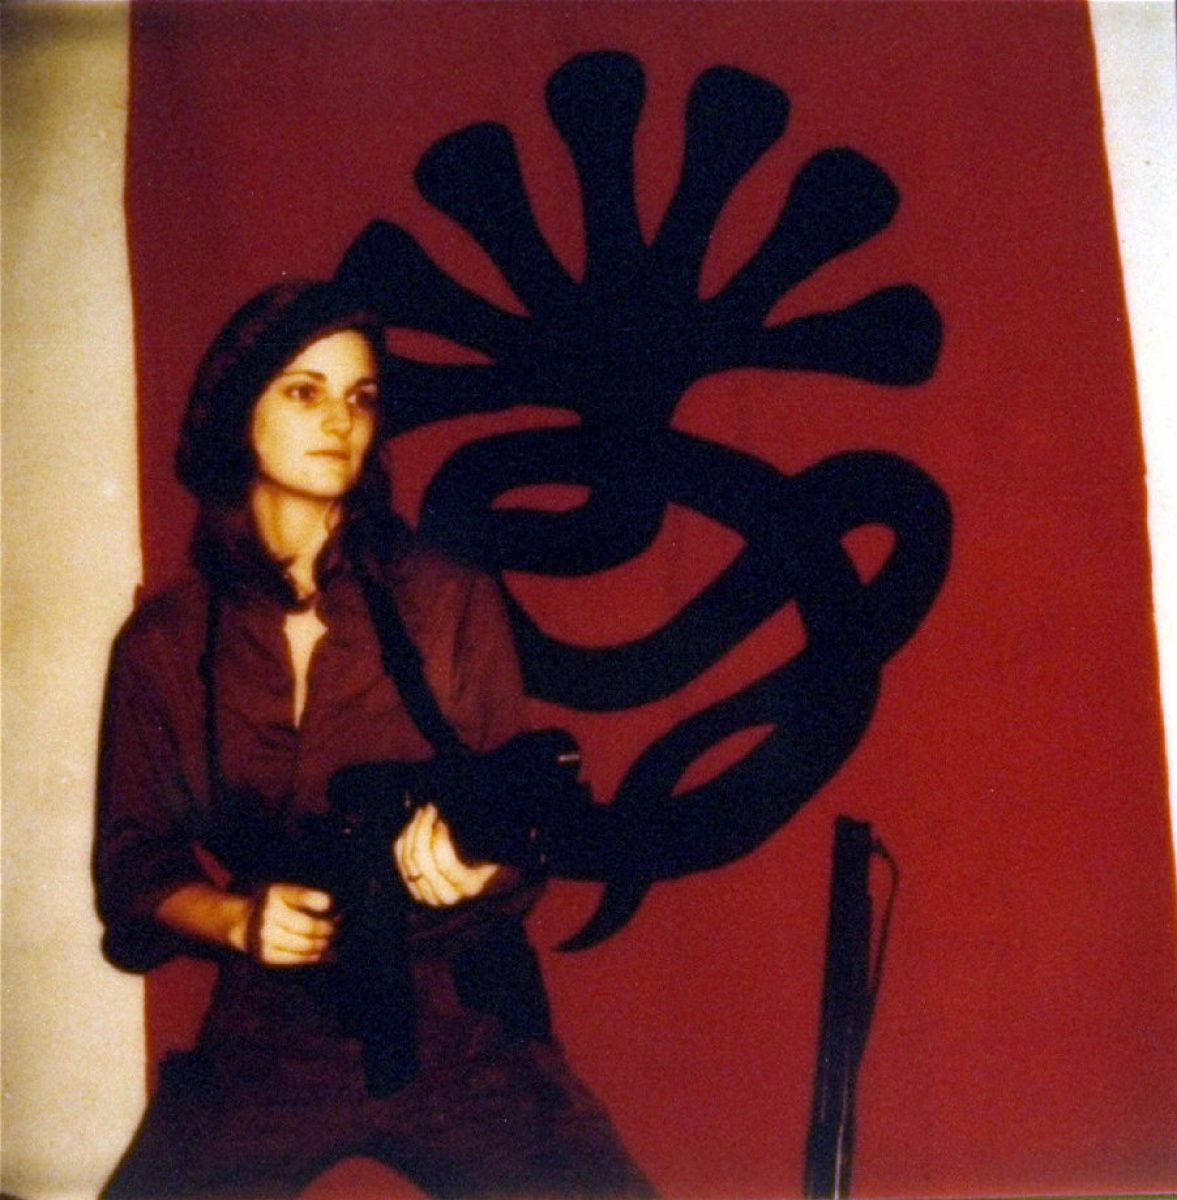 When Patty Hearst became 'Tania' | The Star